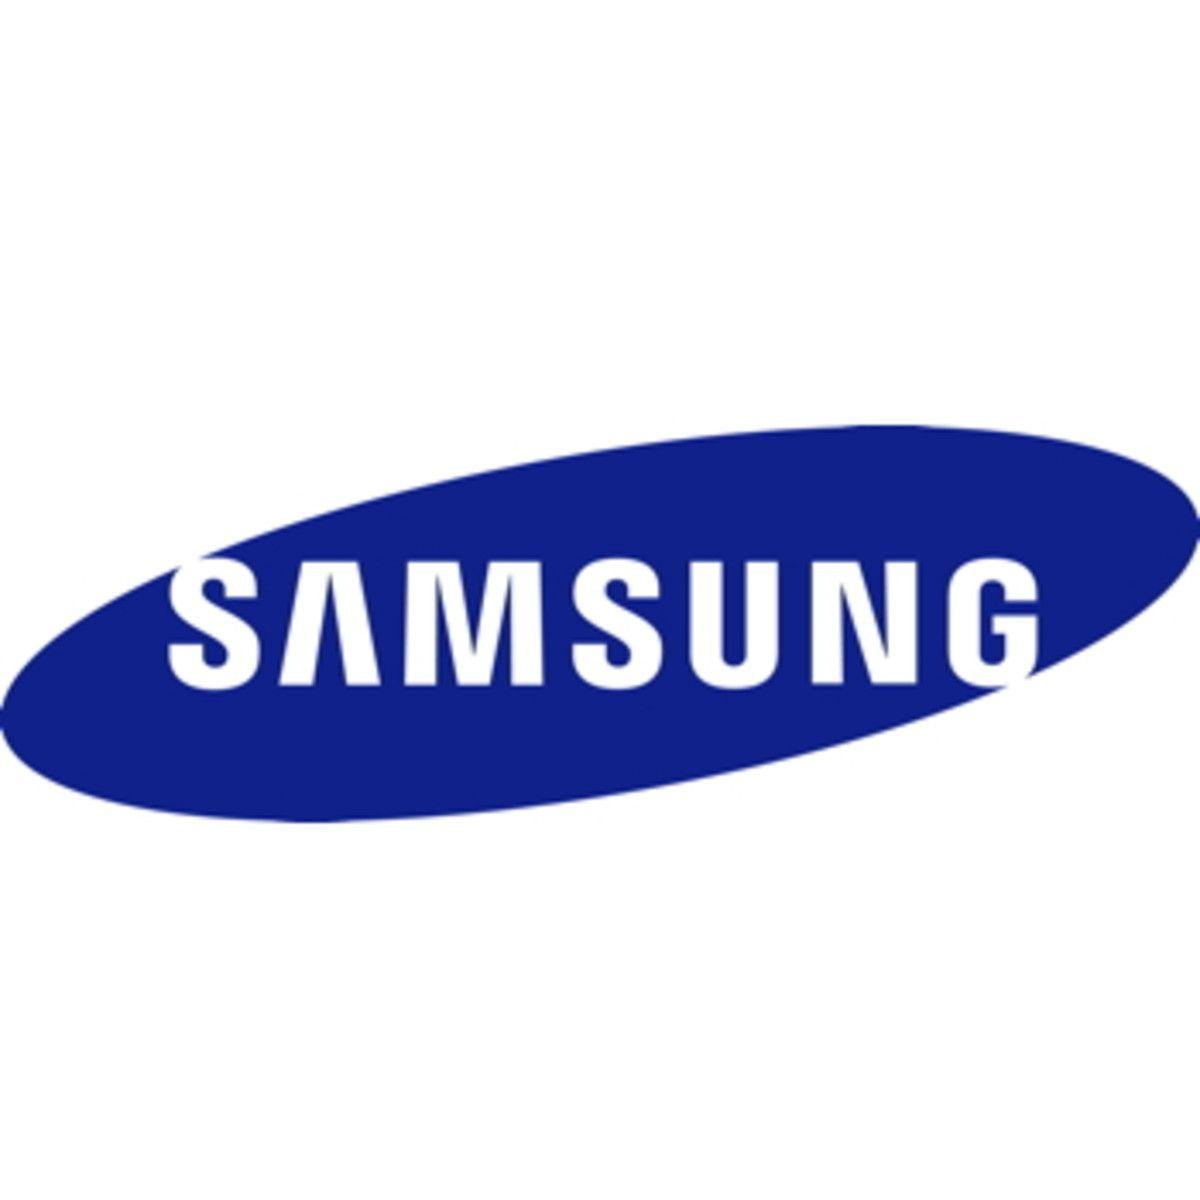 2013 Samsung Logo - Samsung set to launch new notebook line up in second half of 2013 ...